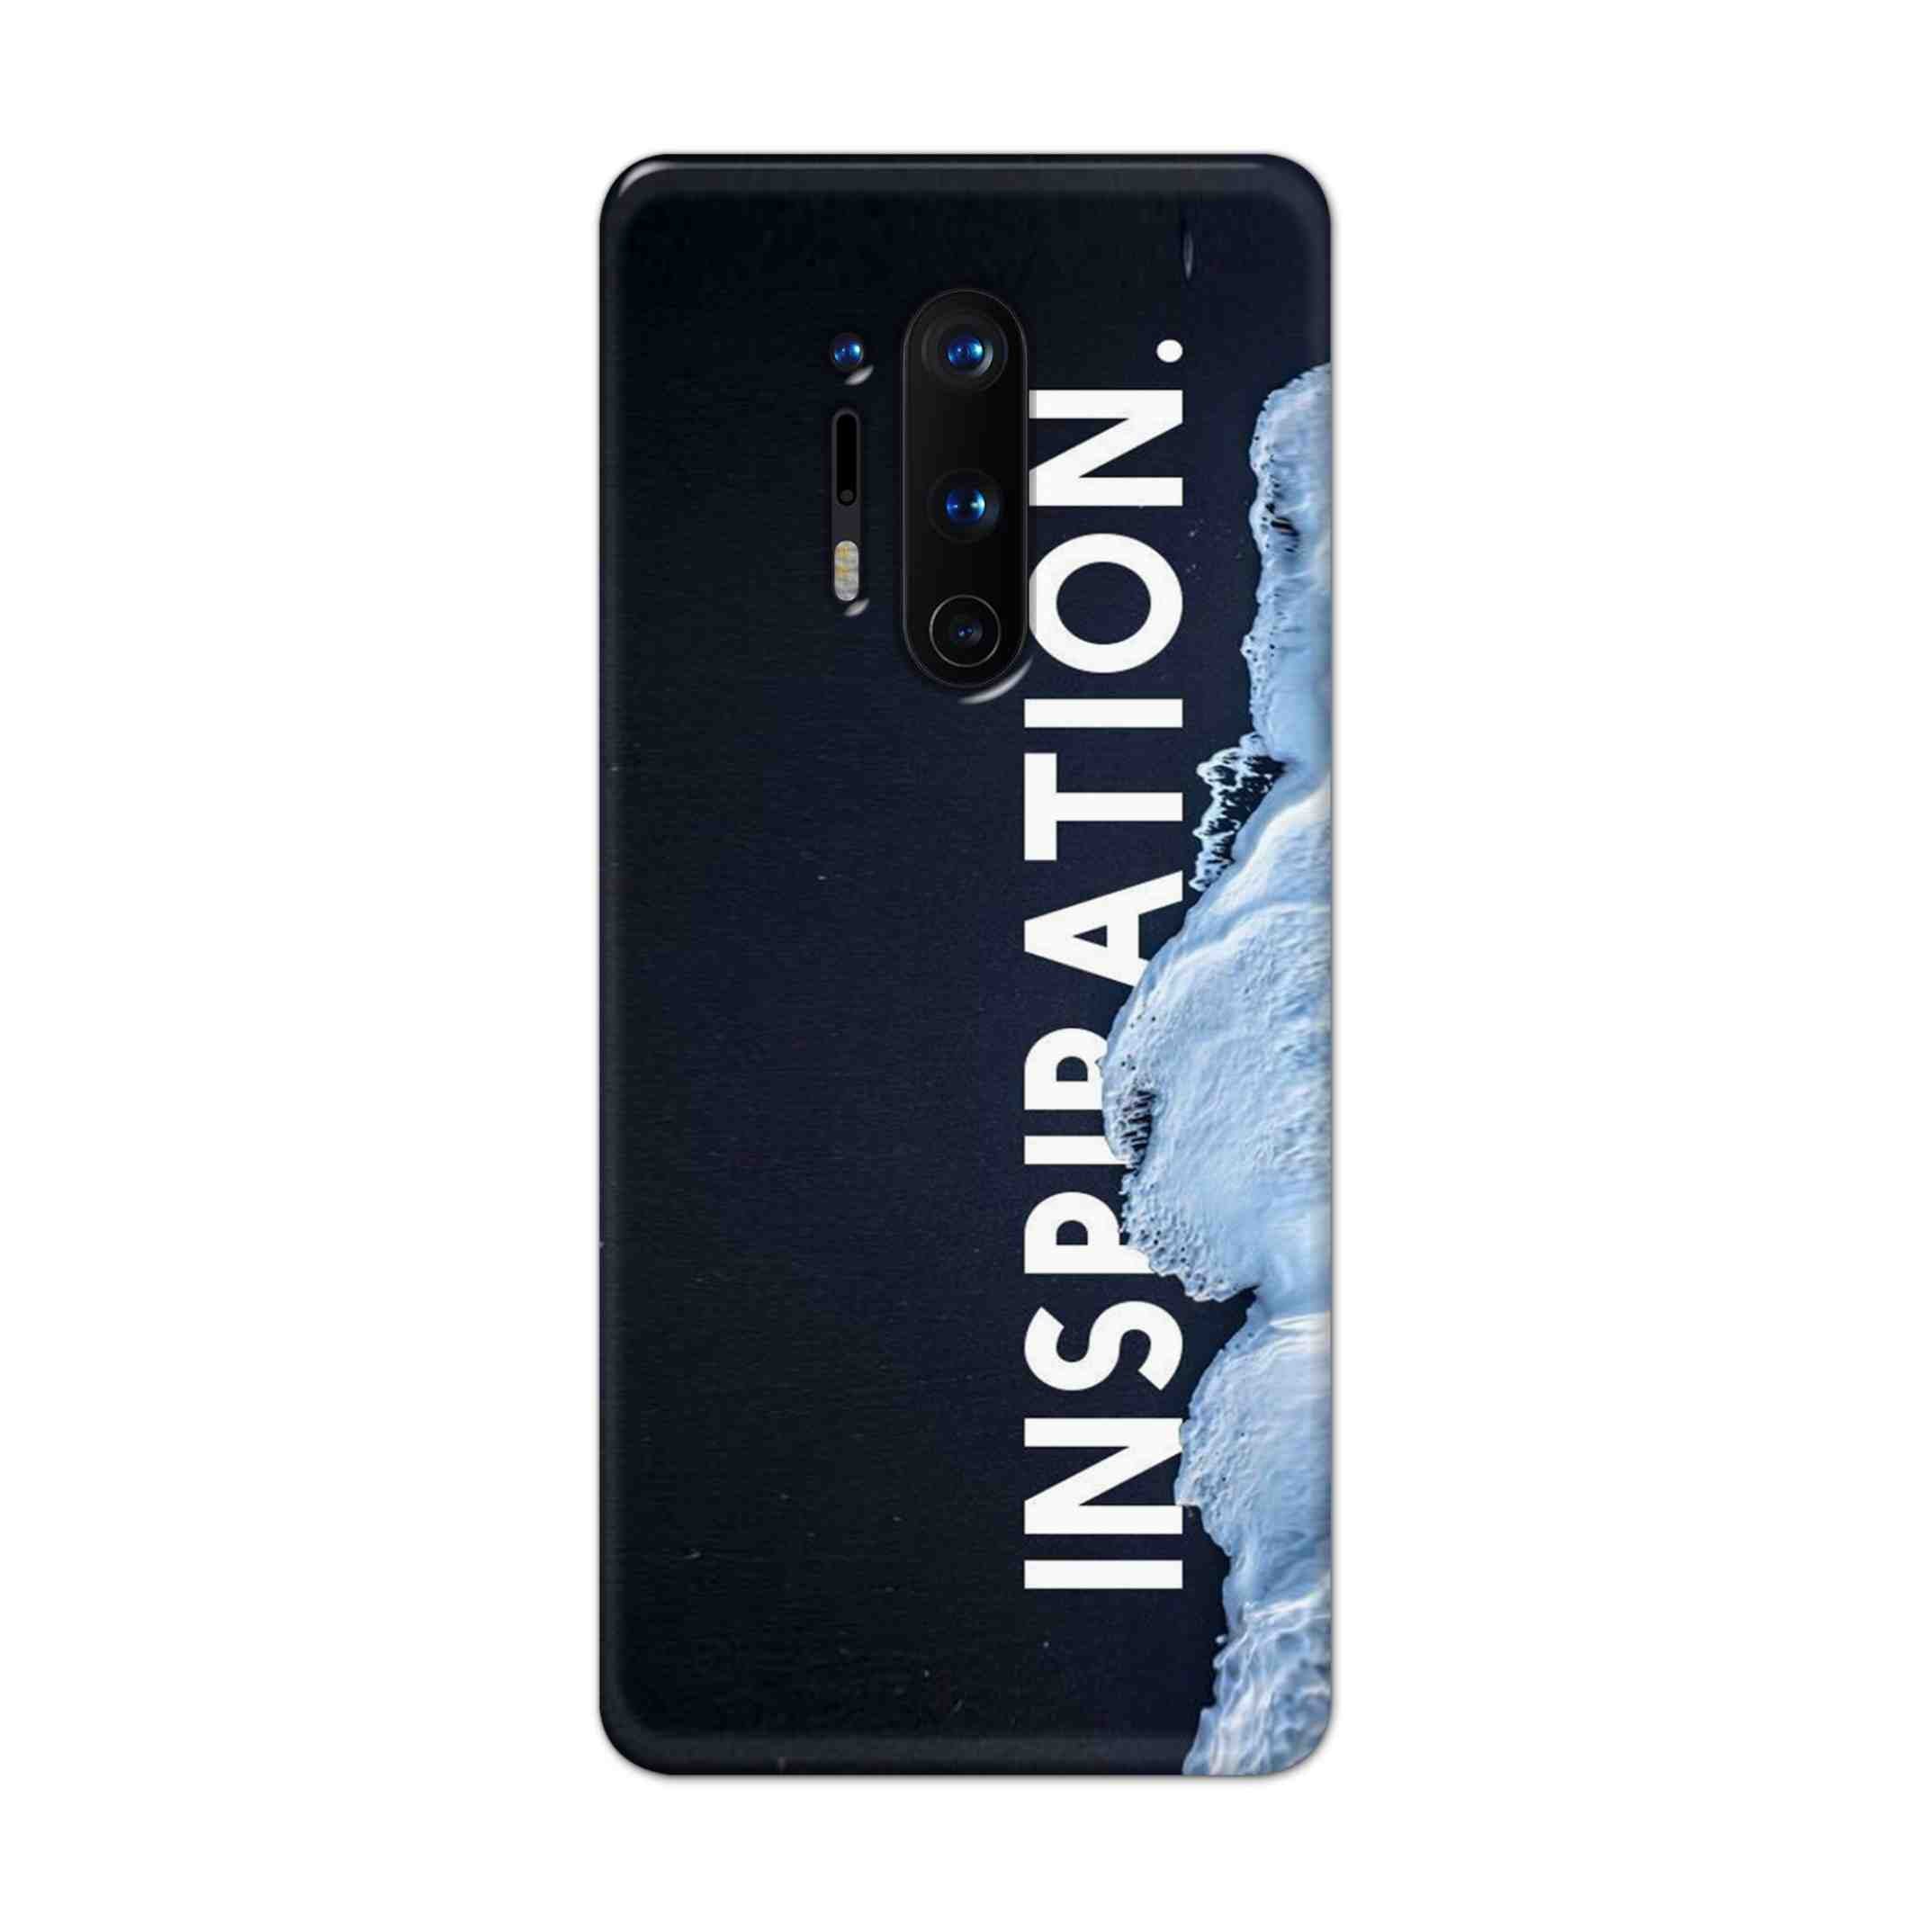 Buy Inspiration Hard Back Mobile Phone Case Cover For OnePlus 8 Pro Online